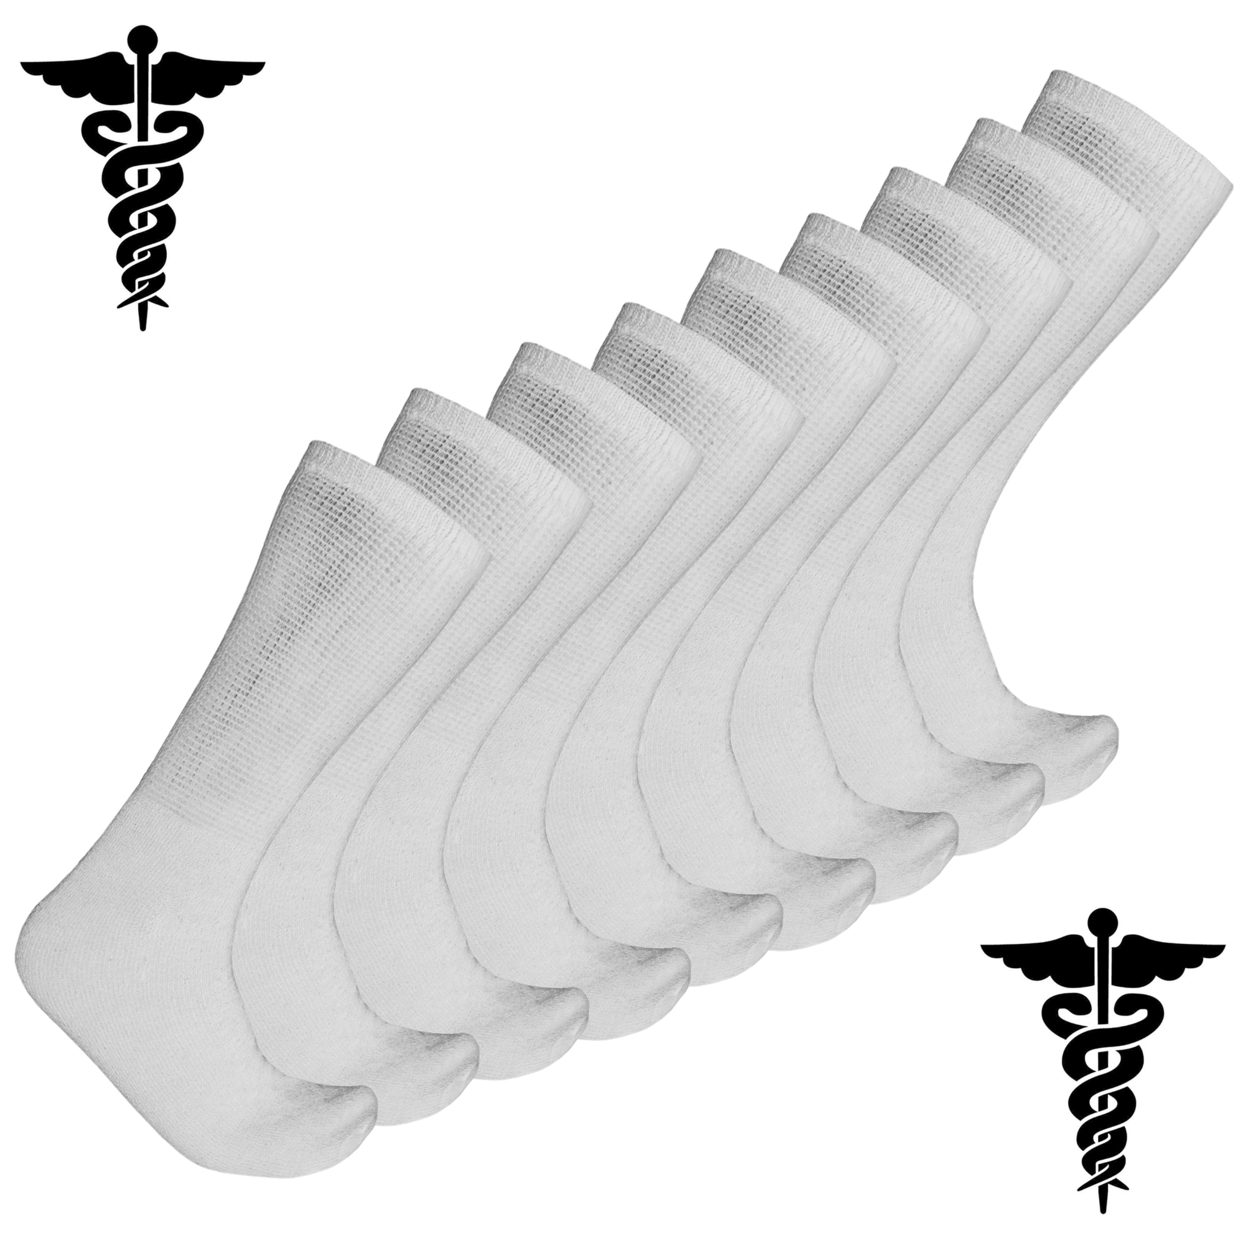 6-Pairs: Physician Approved Therapeutic Diabetic Socks - White, Women's